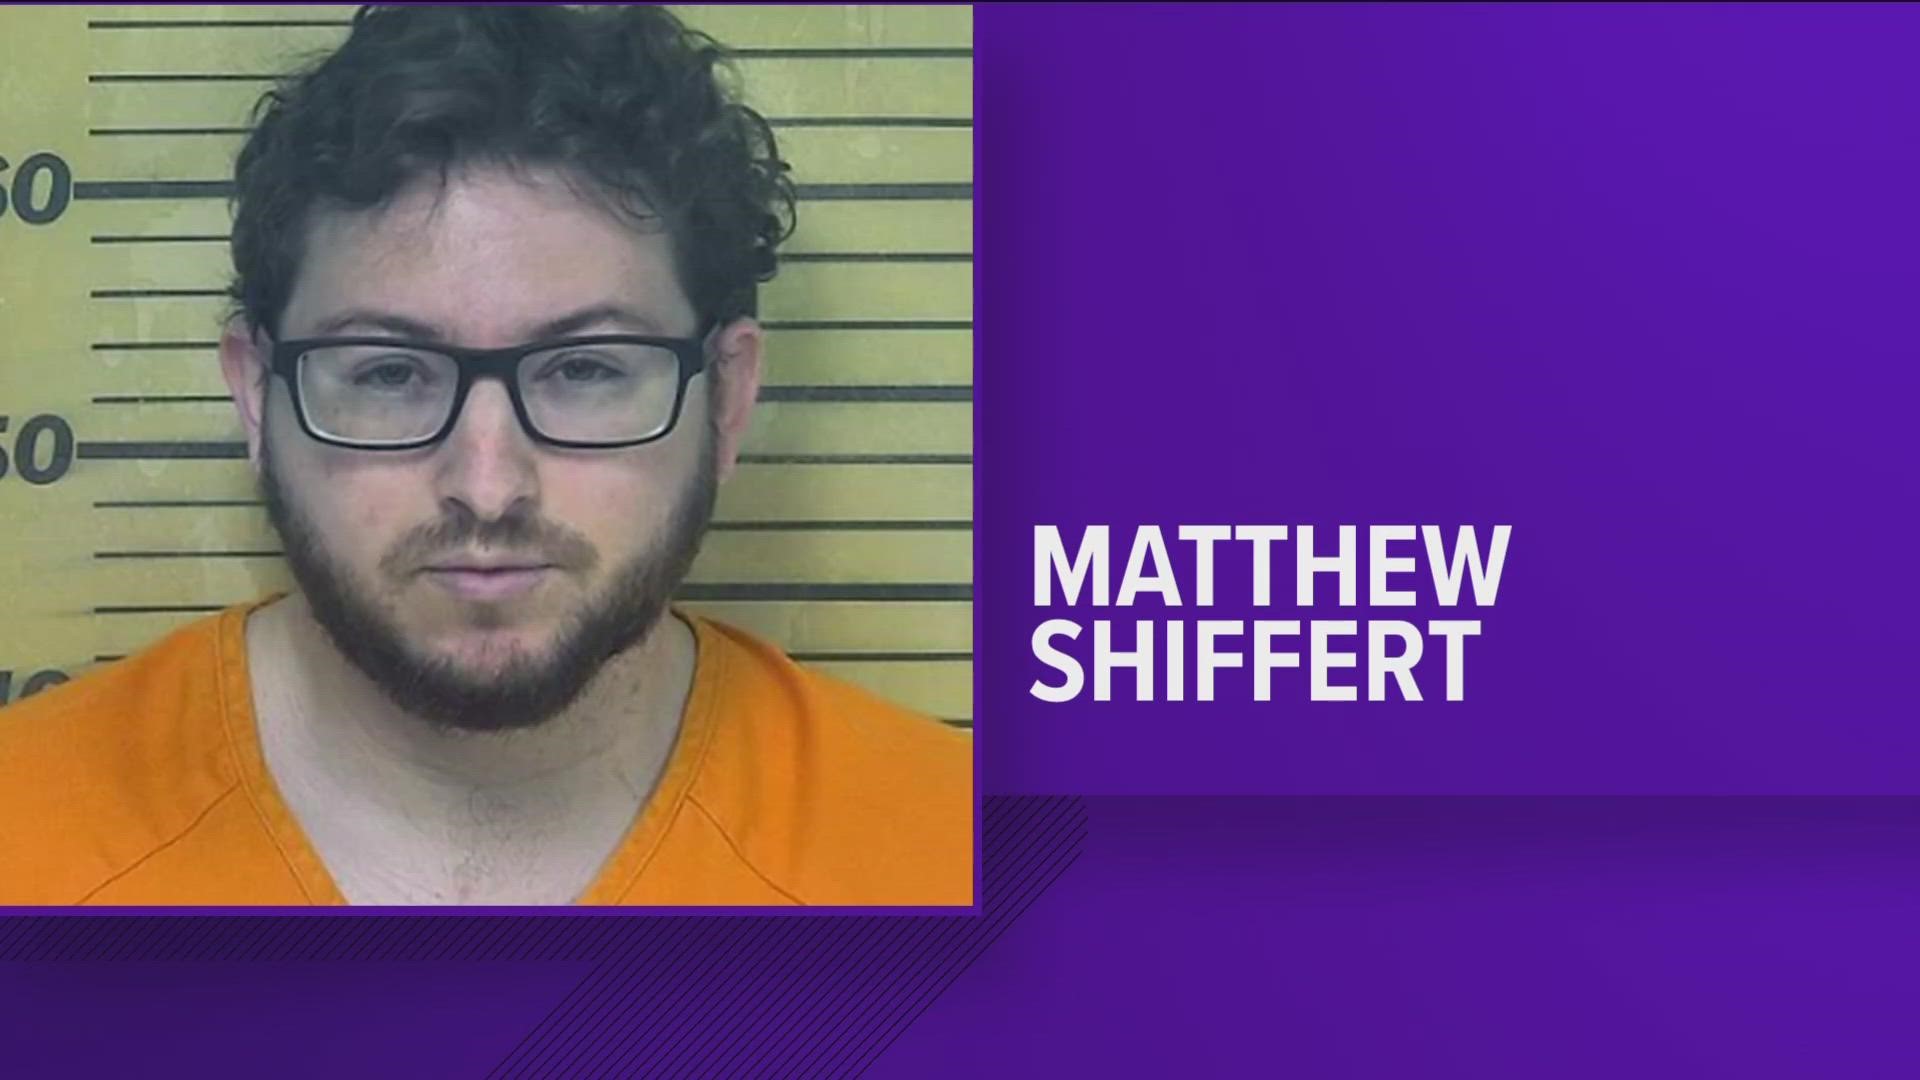 29-year-old Matthew Shiffert is facing five felony counts after the Ottawa County Sheriff's Office executed a search warrant Friday.